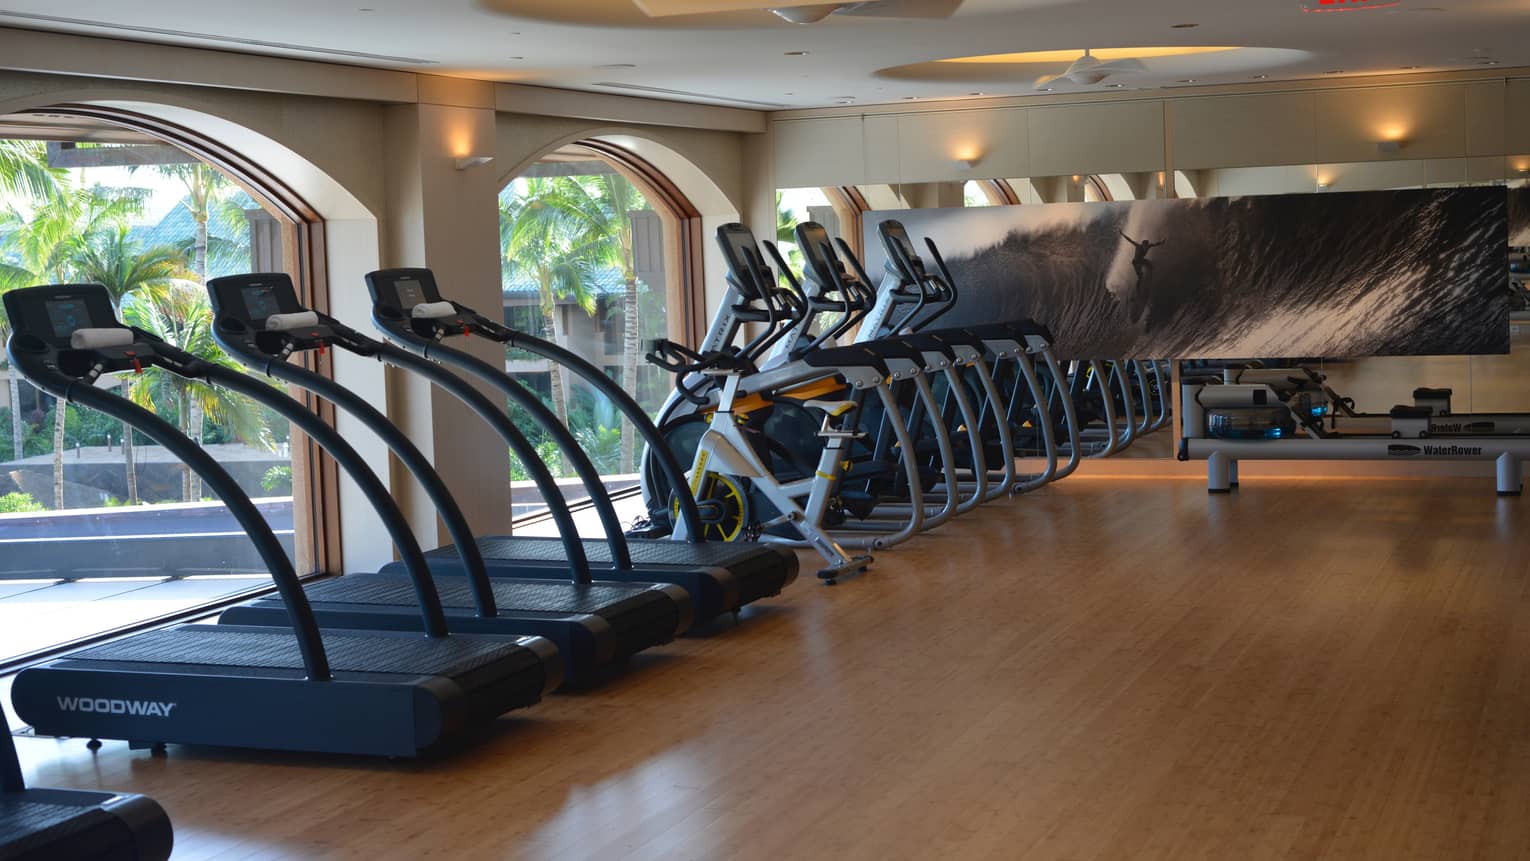 Fitness Centre treadmills, cardio bikes lined up against arched windows, large print with surfer on wave